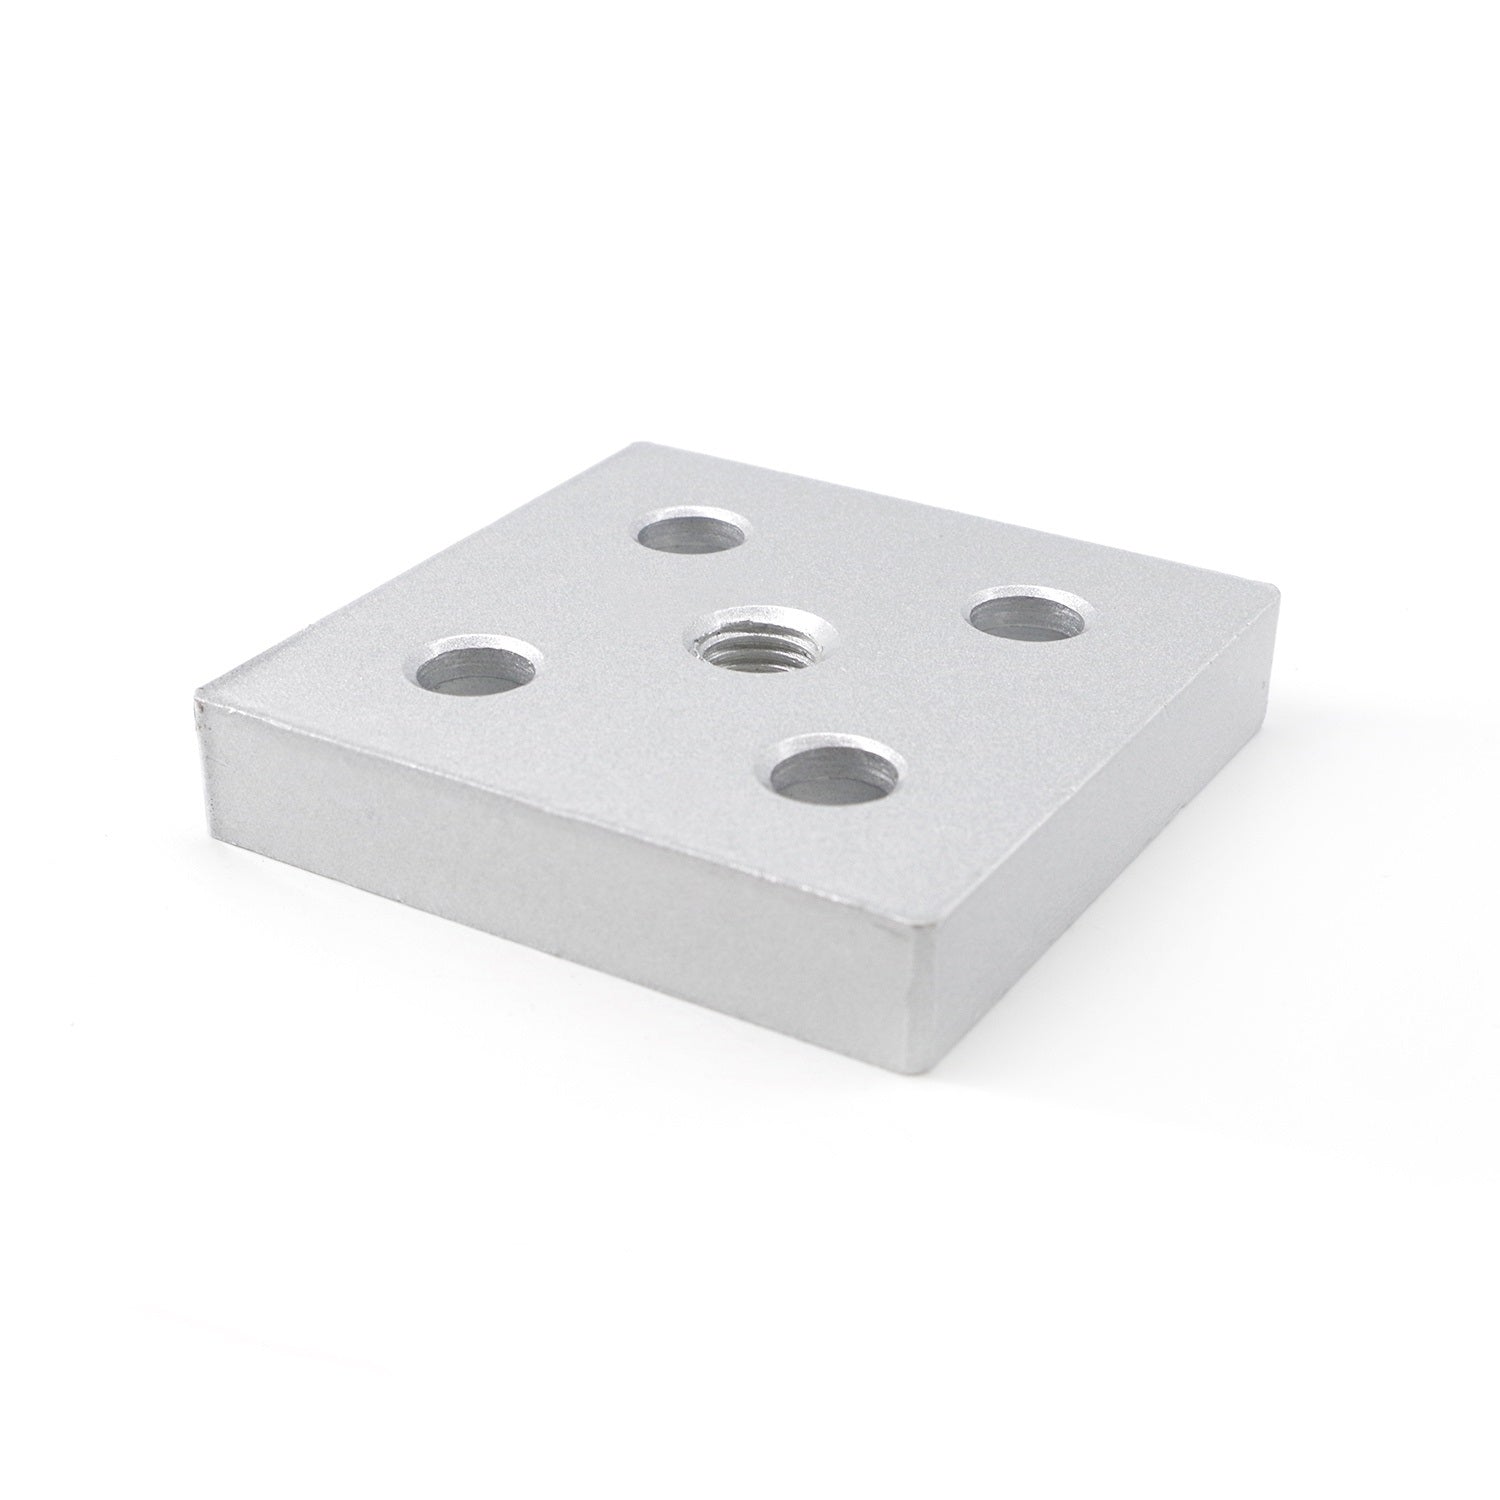 30 series Base Plate Connection 6060-M16